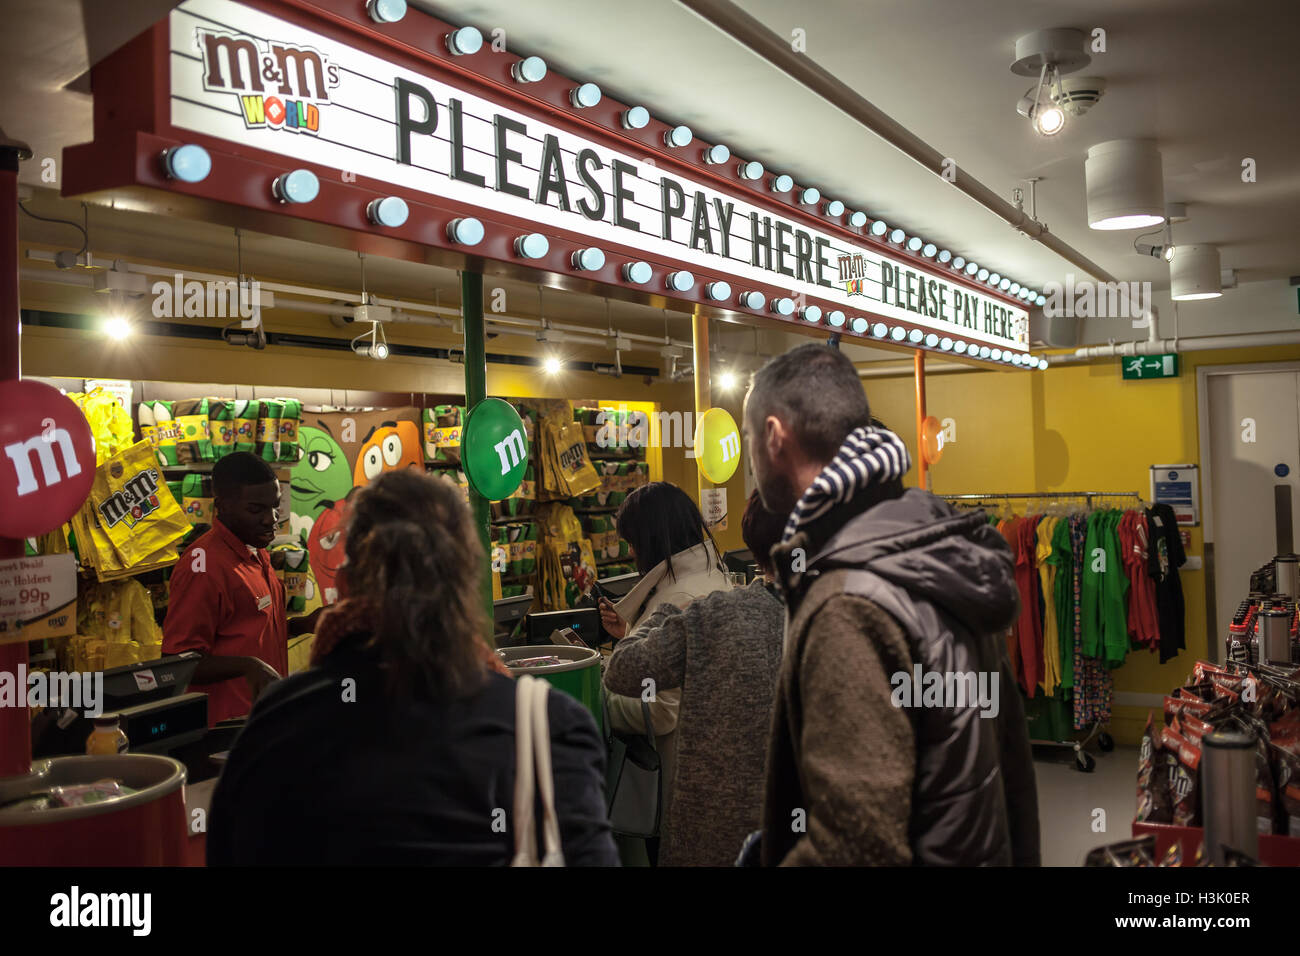 M&M store people waiting to pay for goods in front of the cash register under the sign 'please pay here' in London, UK Stock Photo